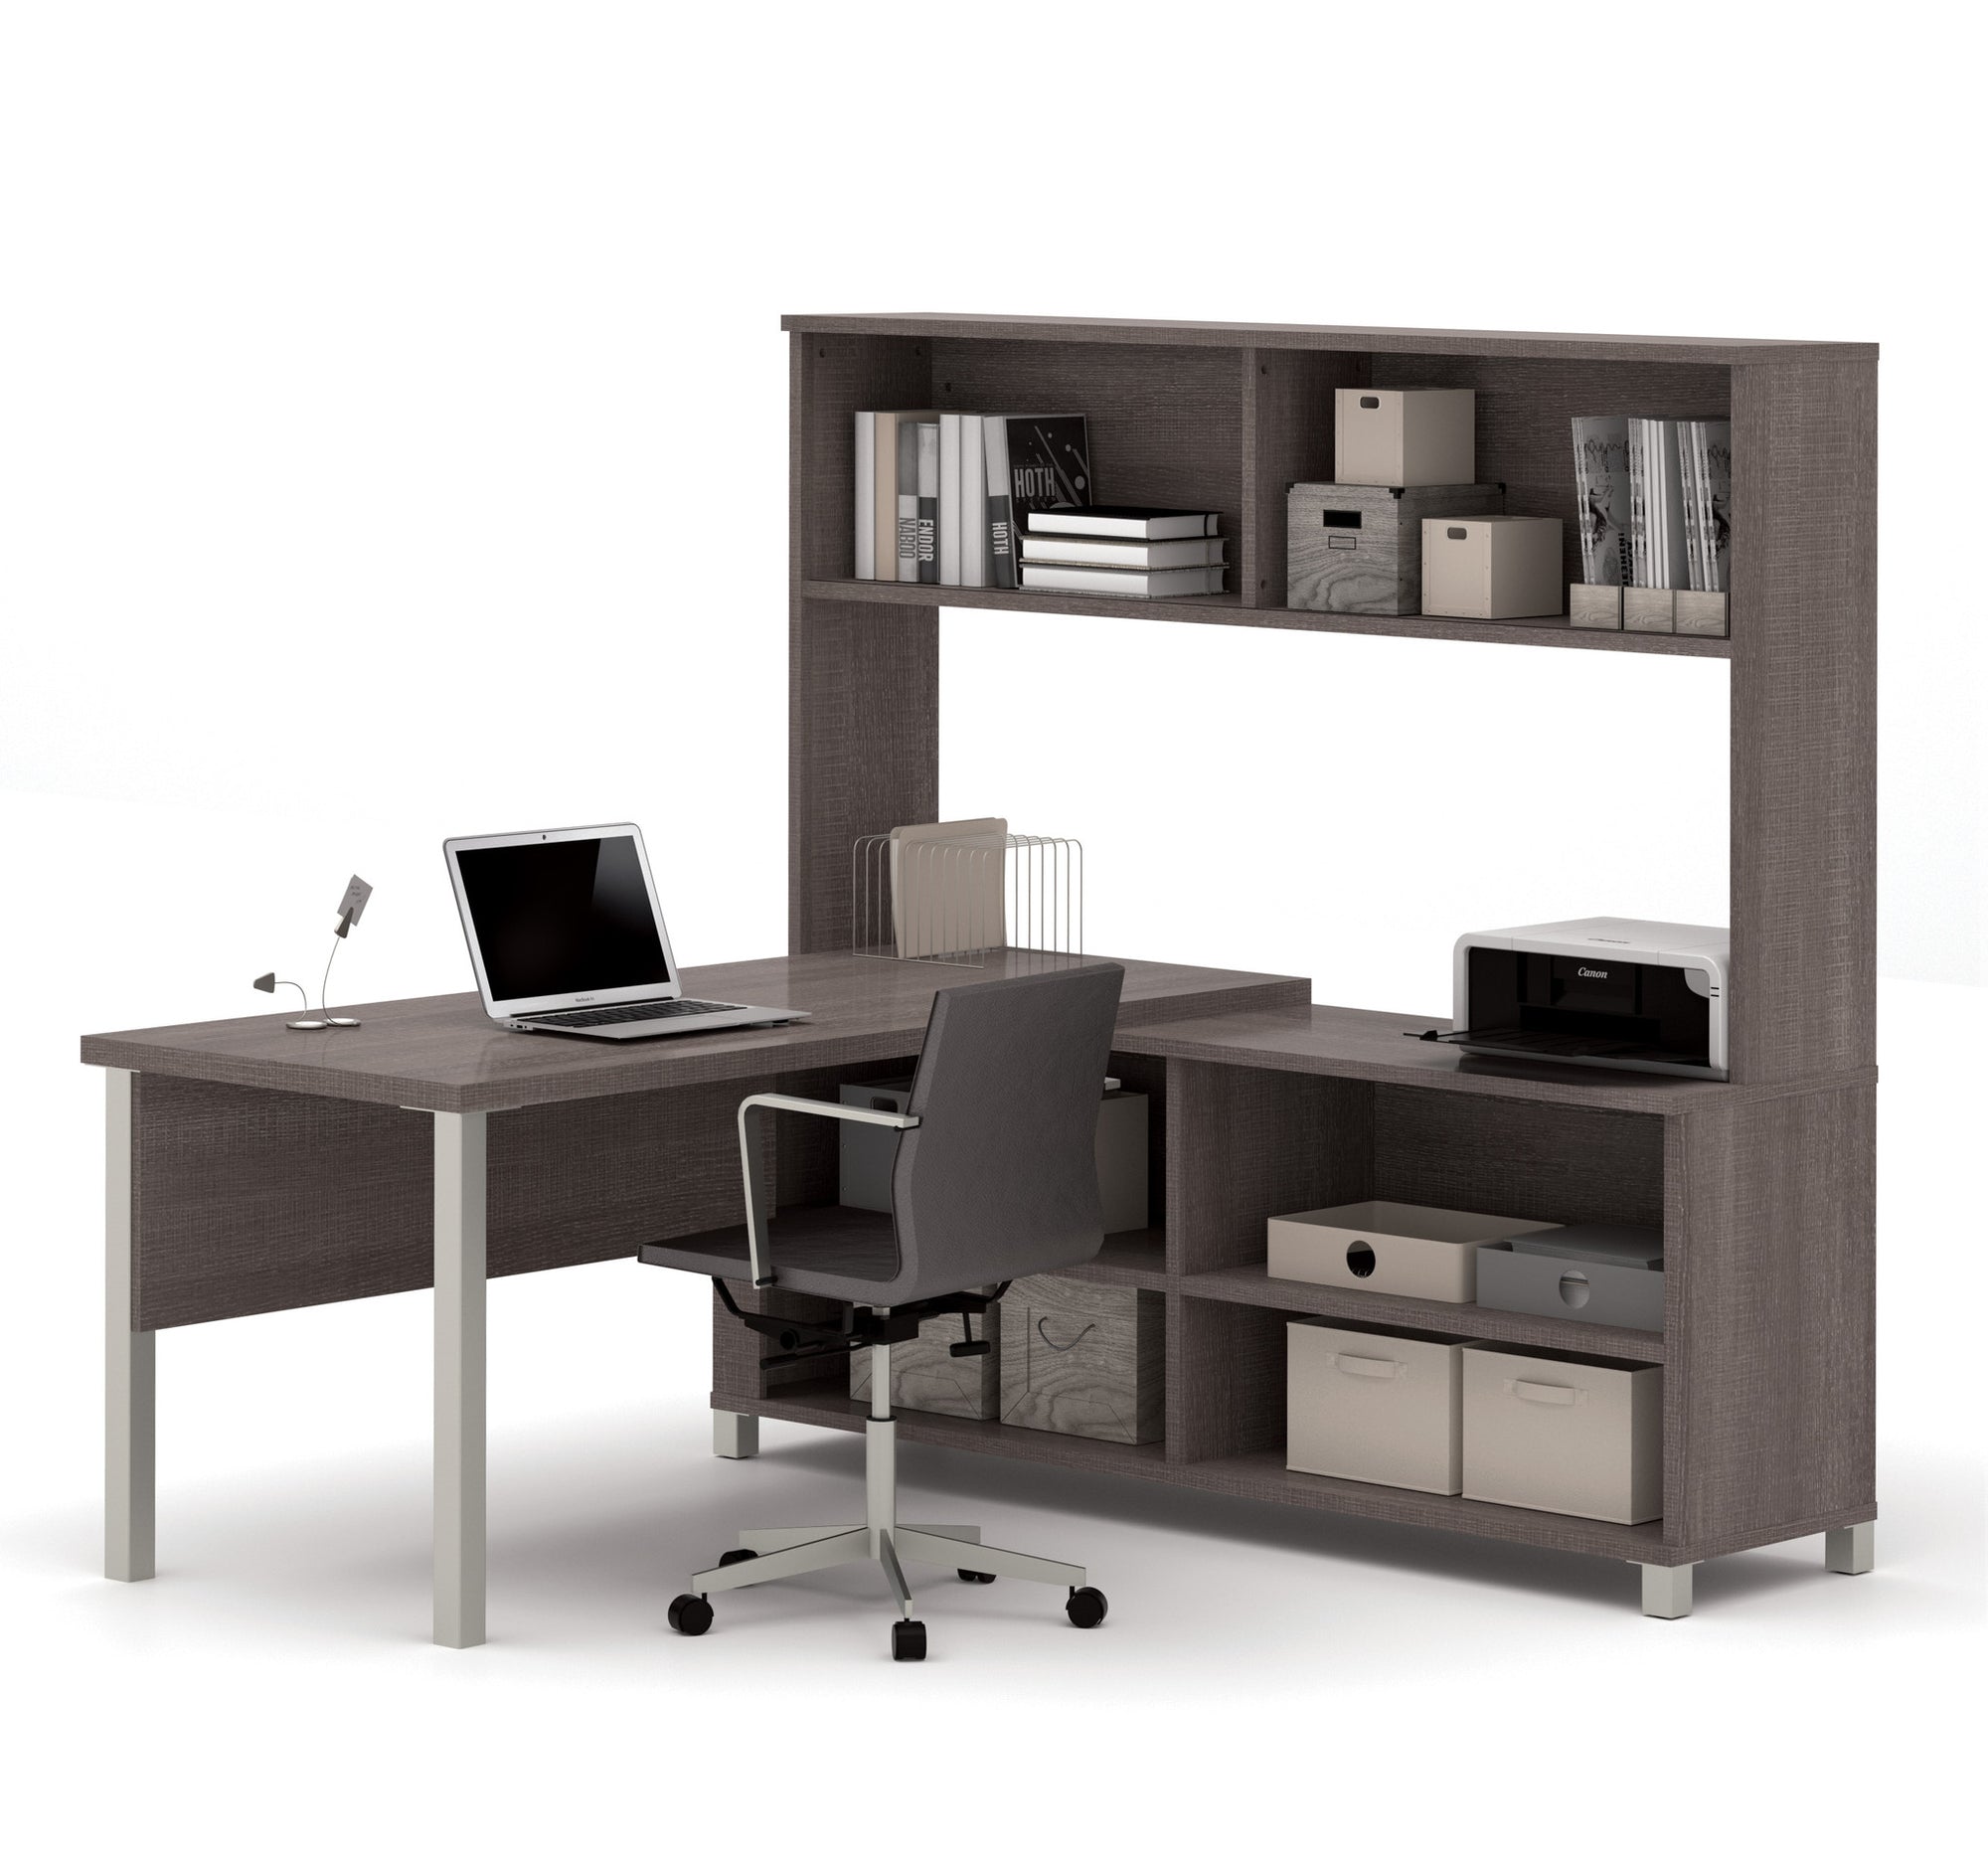 71 X 71 Bark Gray L Shaped Desk With Shelving By Bestar